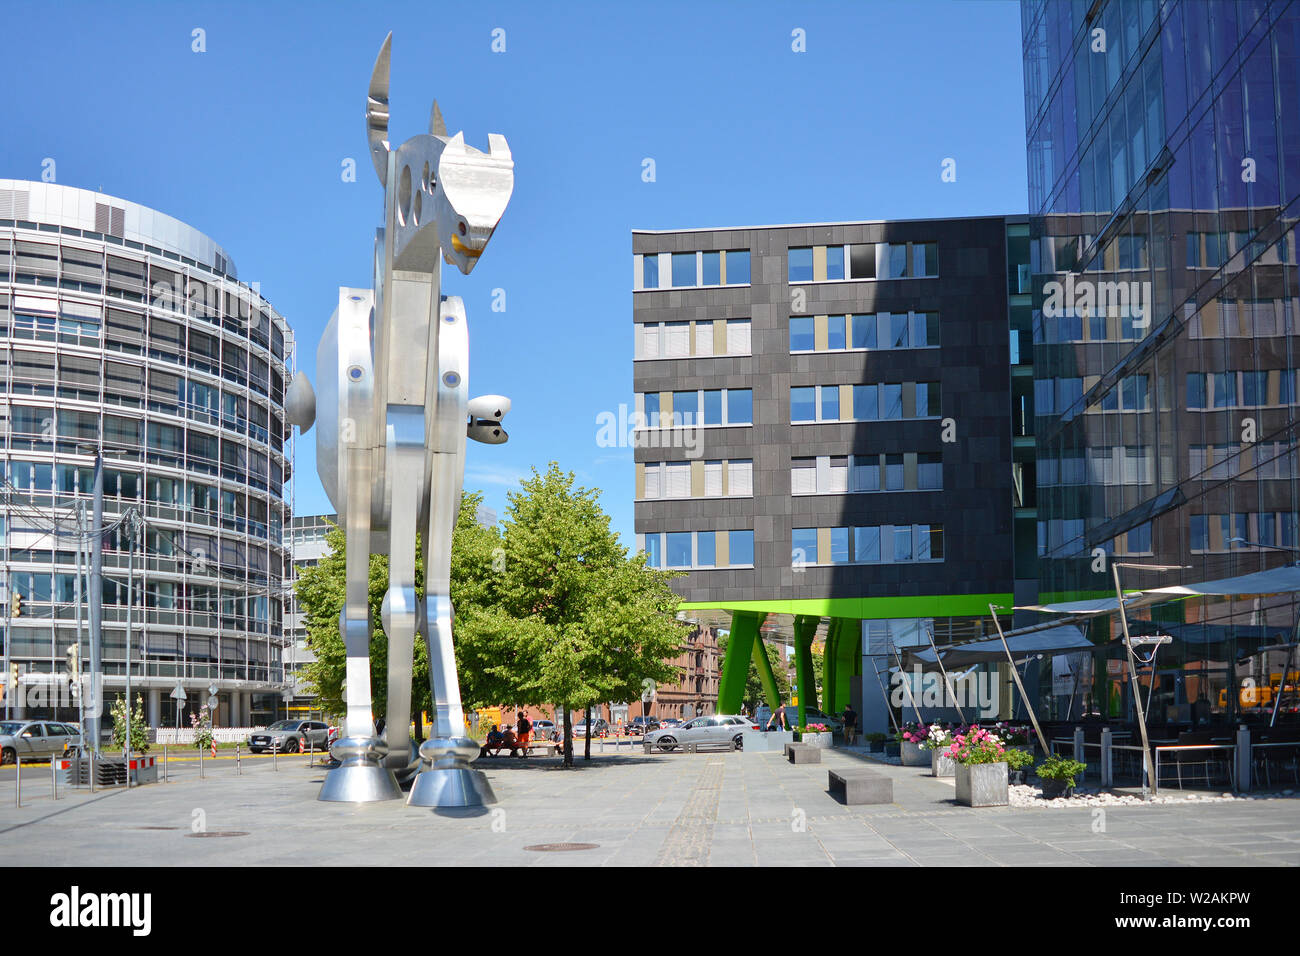 Heidelberg, Germany - July 2019: Small square in front of modern Print Media Academy building with steel sculpture horse called 'S-Printing Horse' Stock Photo